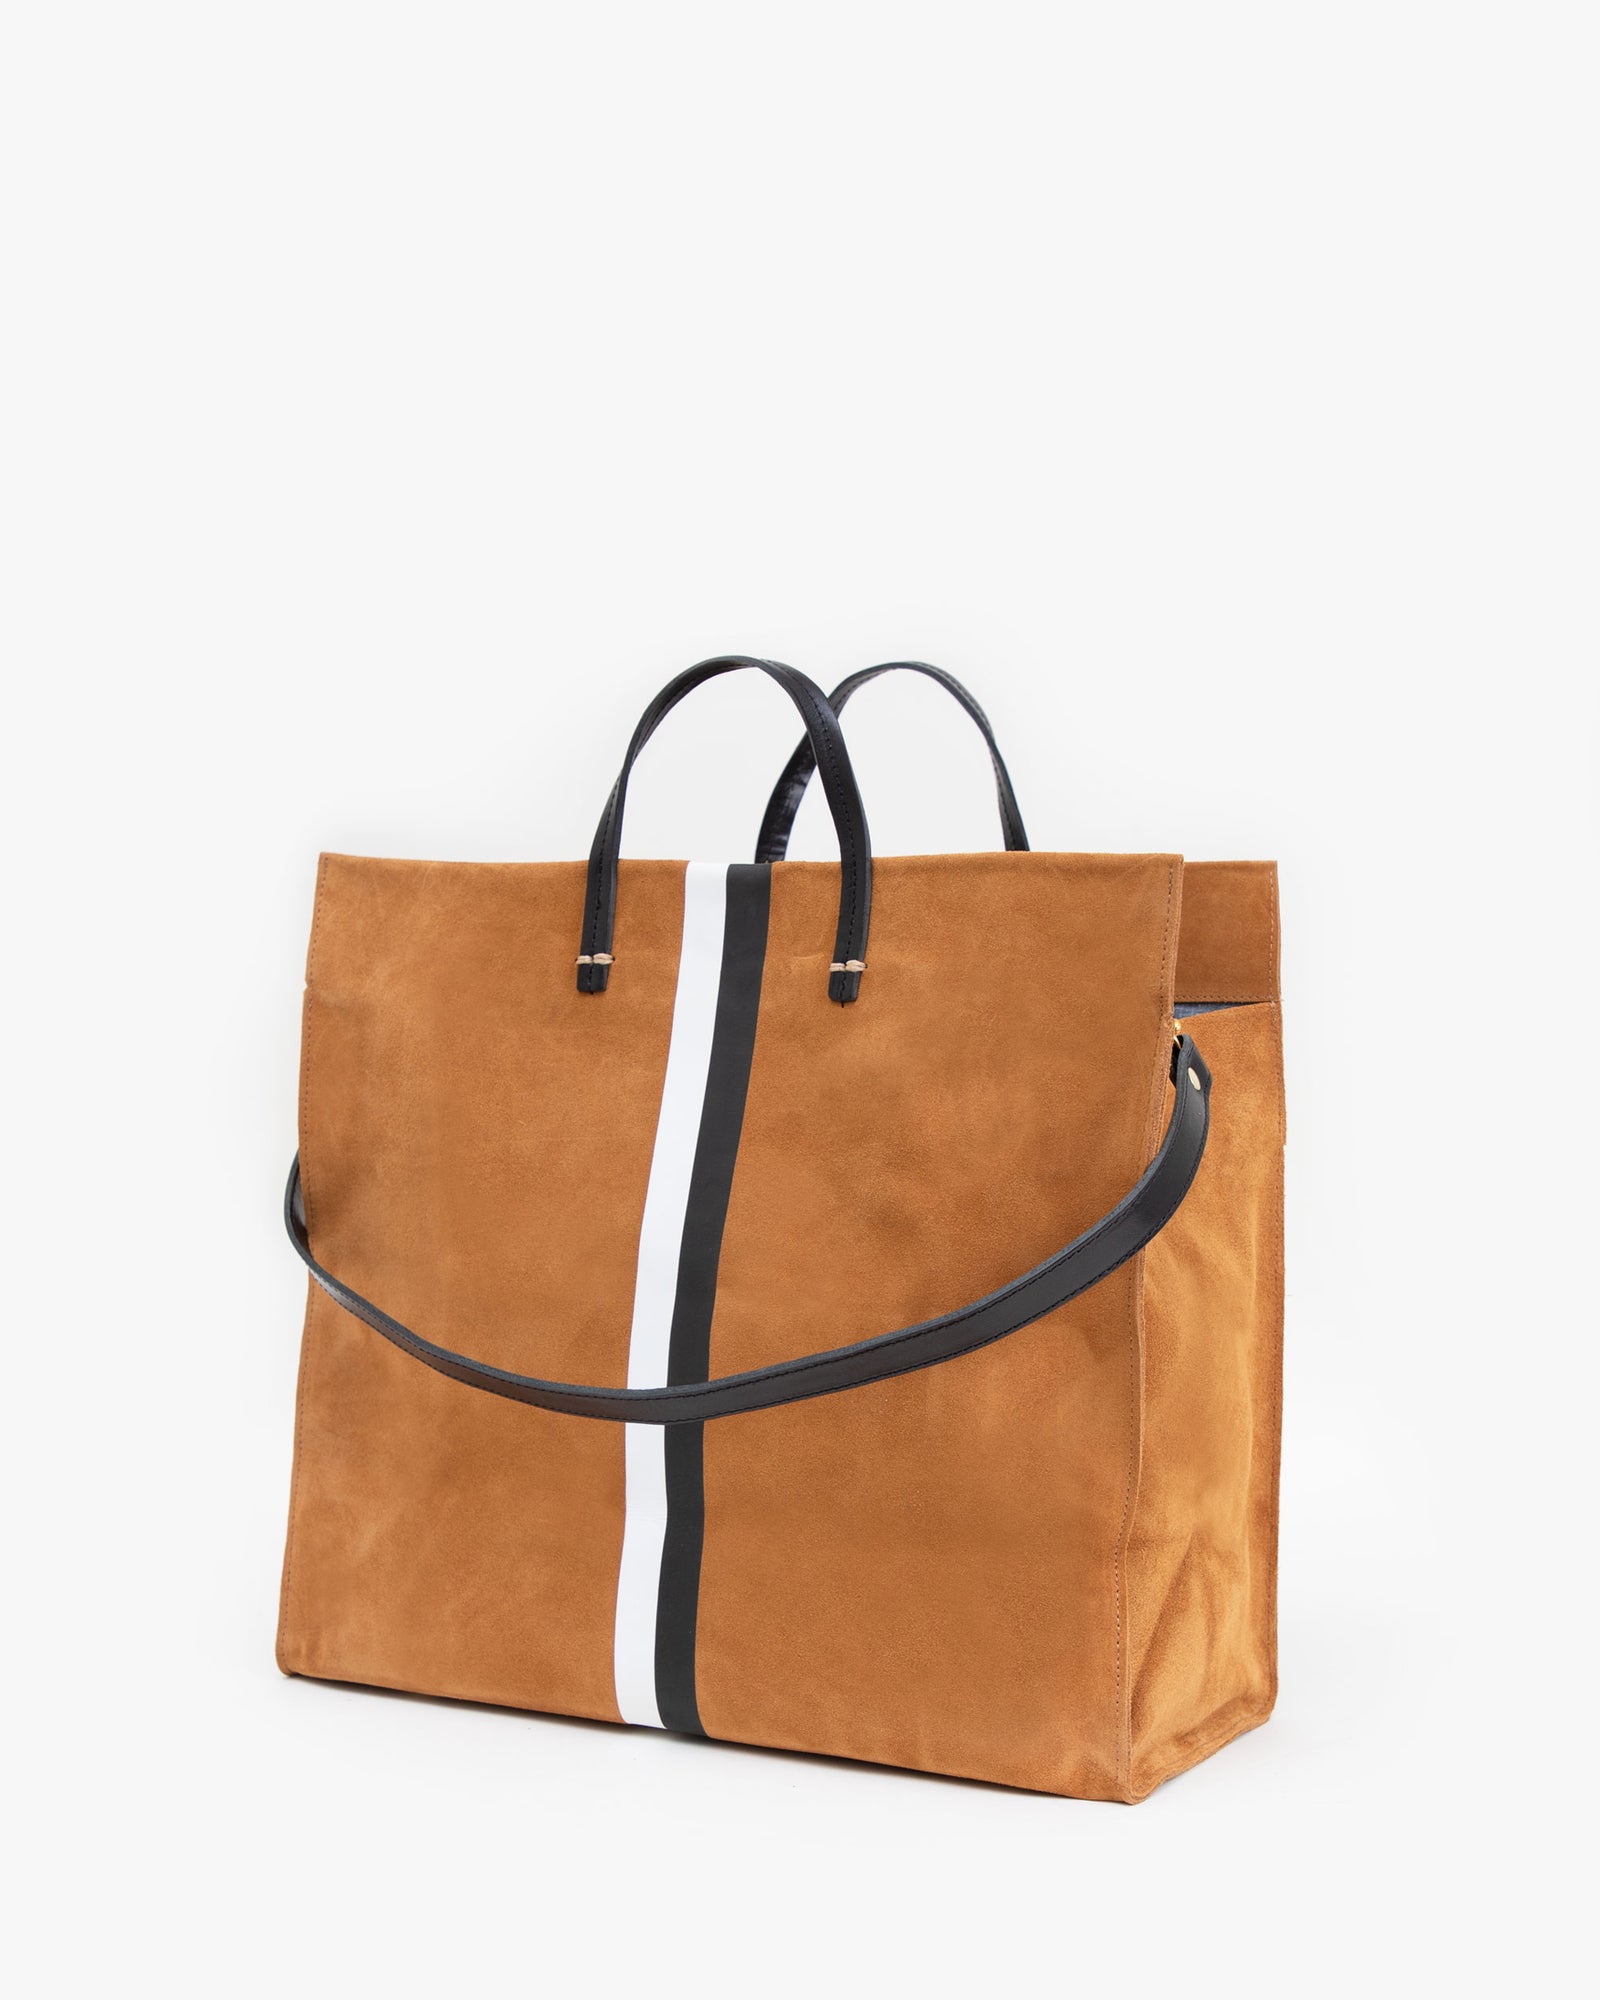 Clare V. Tote Bags